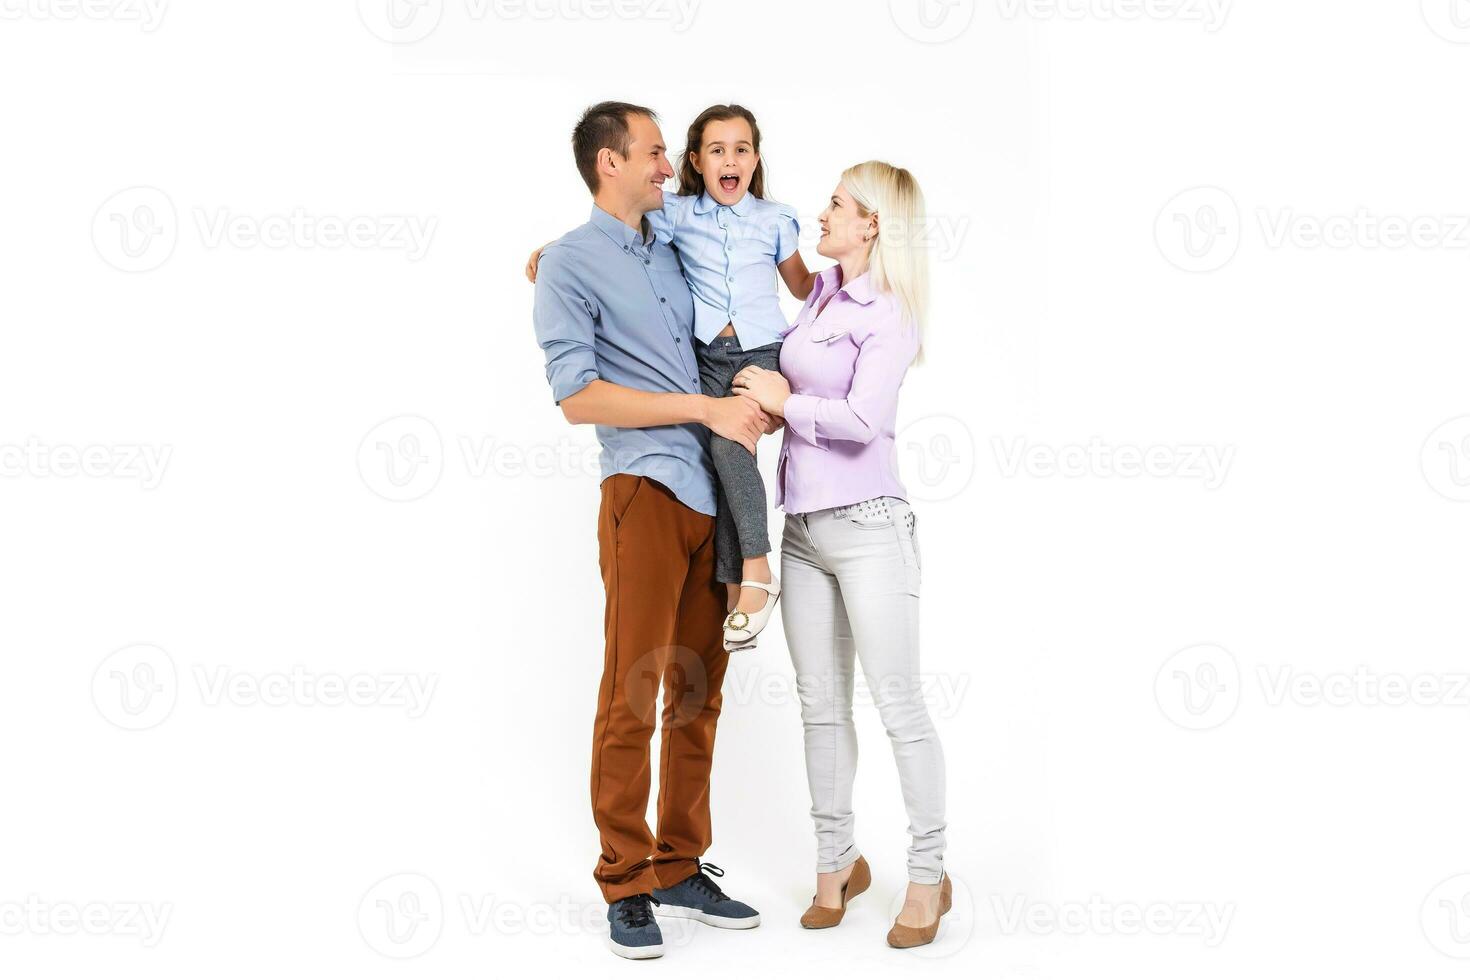 Happy young family with pretty child posing on white background photo